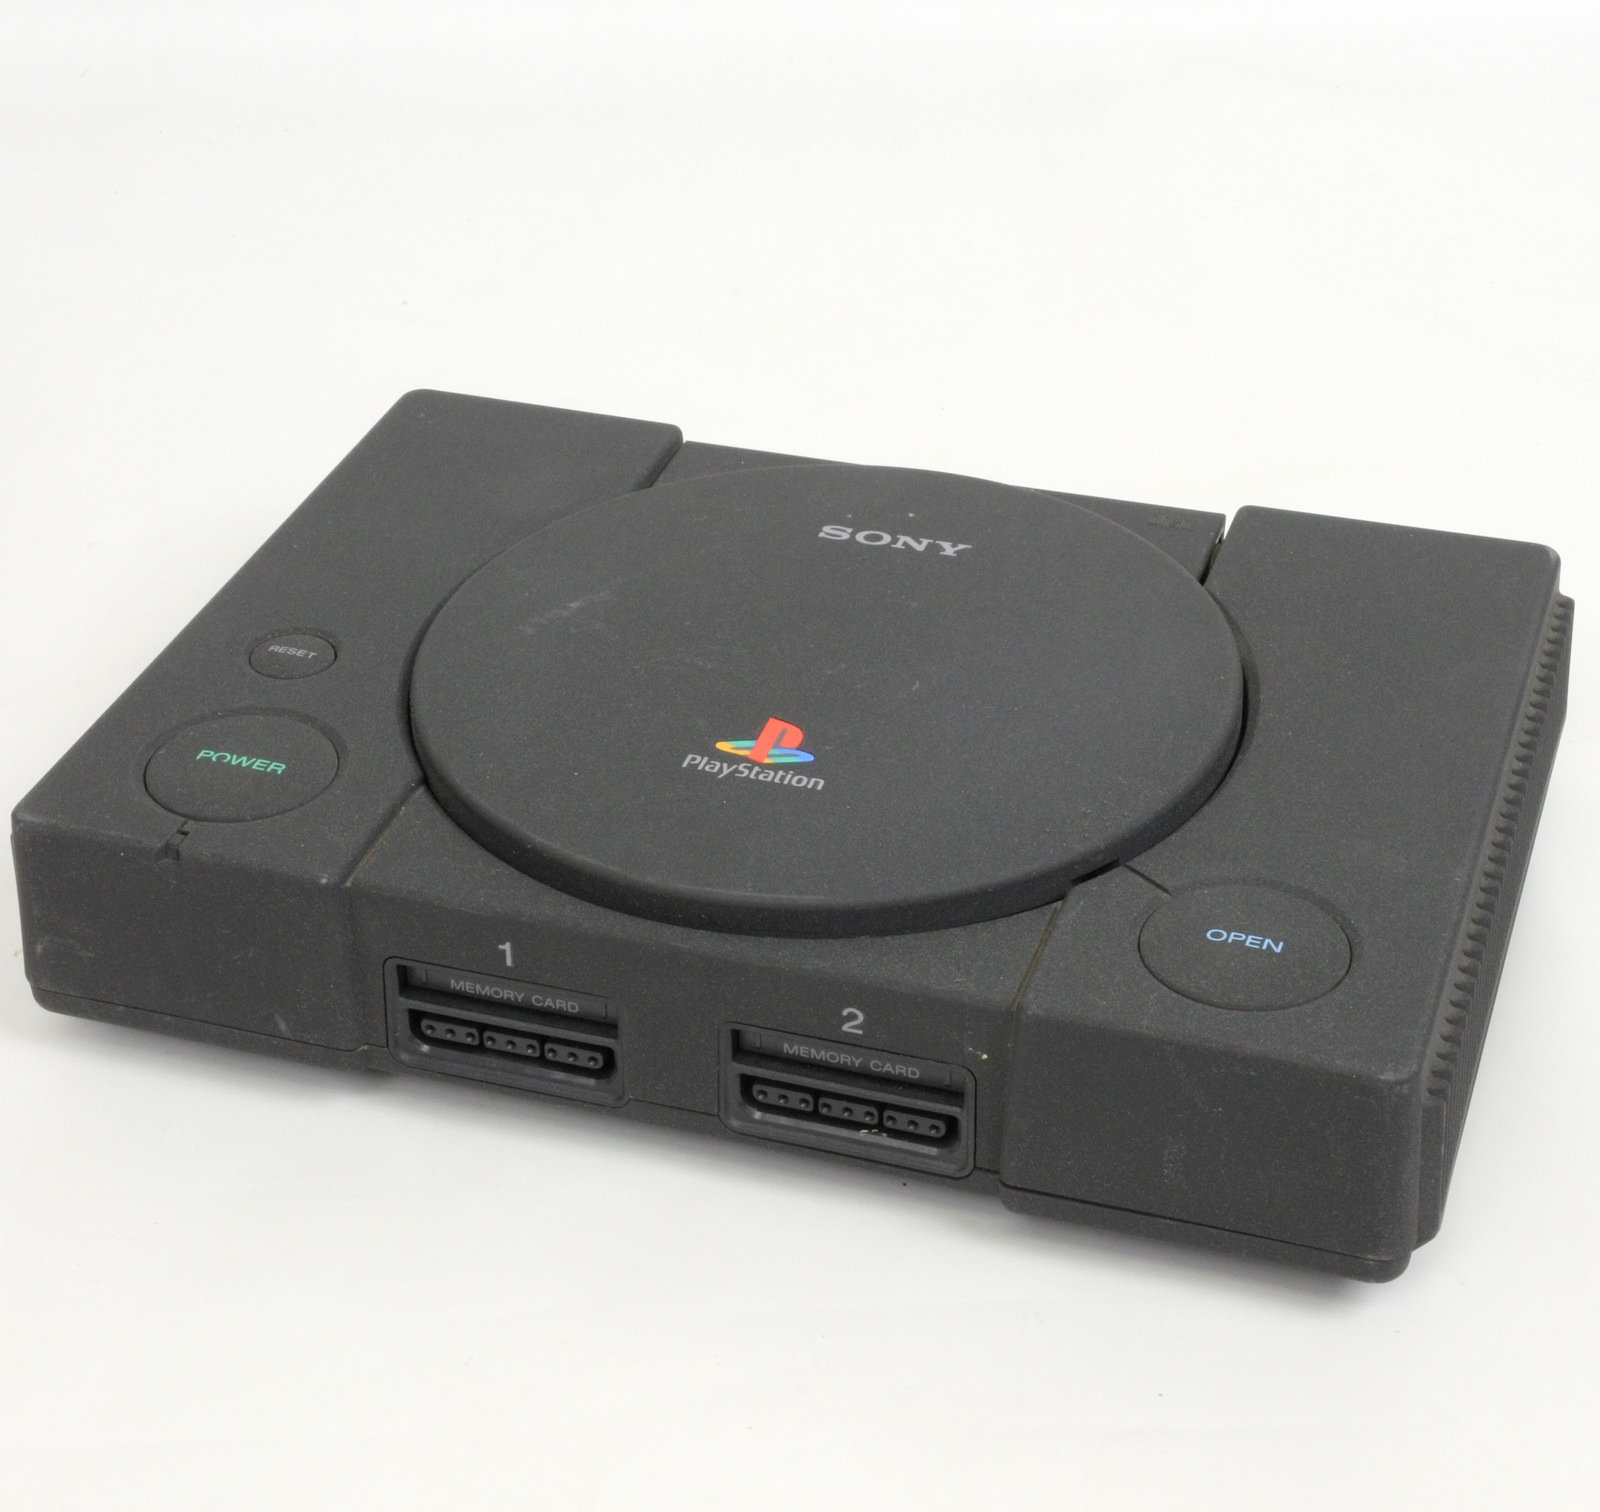 Playstation 1 черная. Ps1 SCPH 1000. Ps1 SCPH 9002. SCPH 5000. Sony PLAYSTATION SCPH-5500.